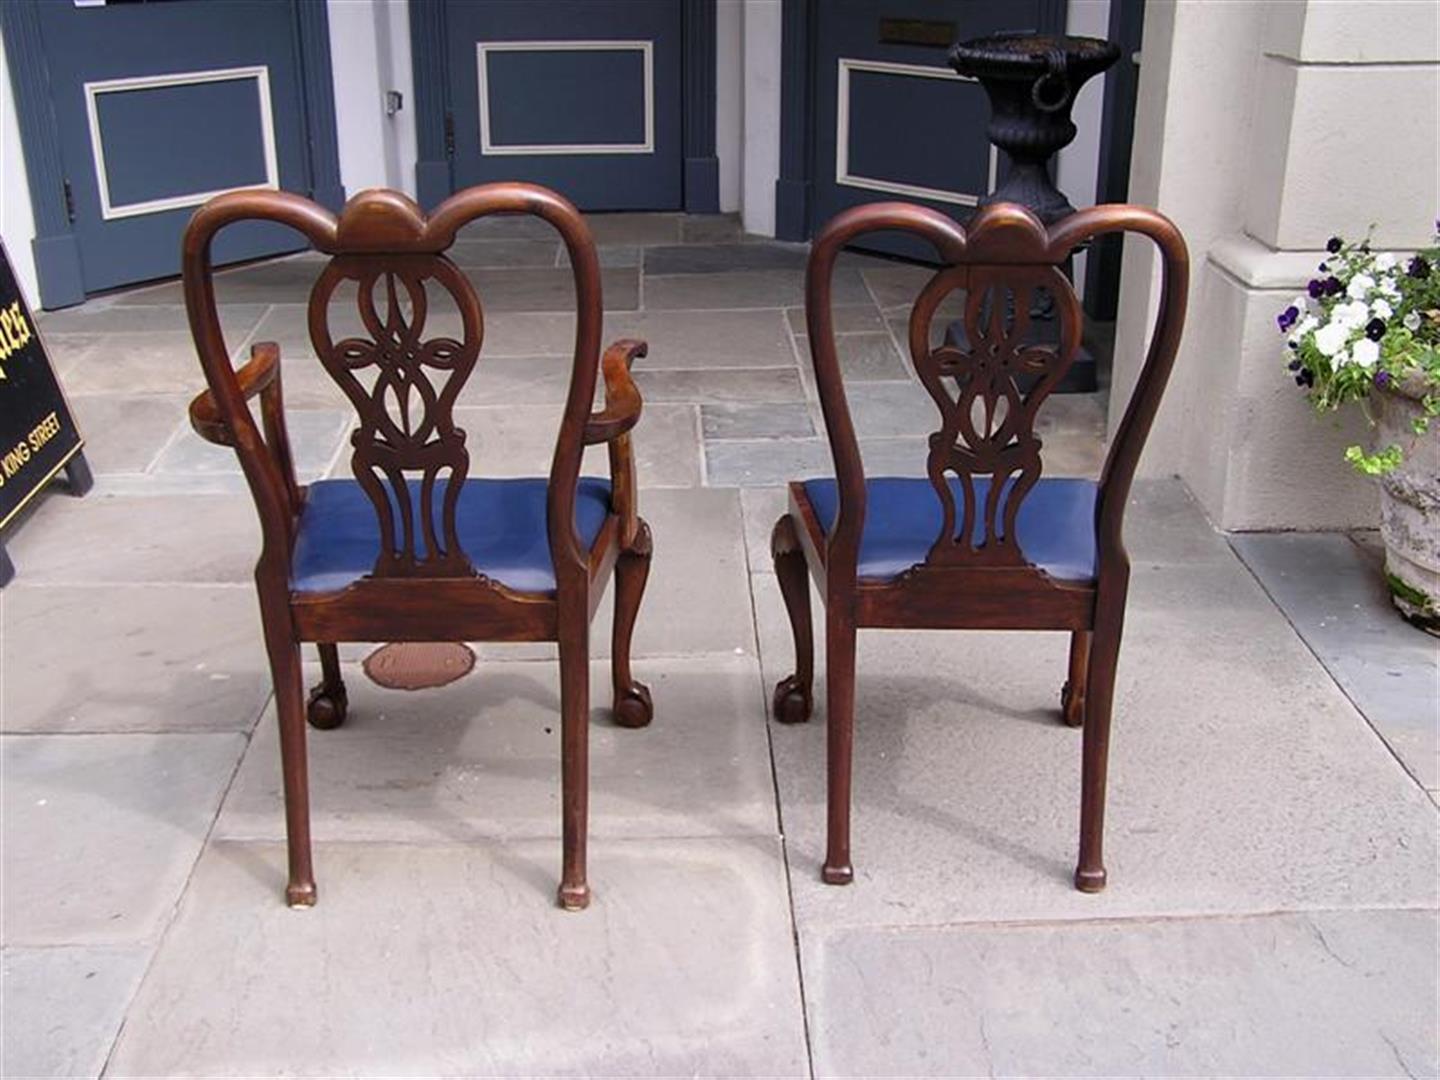 Set of Eight English Mahogany Dining Room Chairs with Leather Seats, Circa 1850 For Sale 3